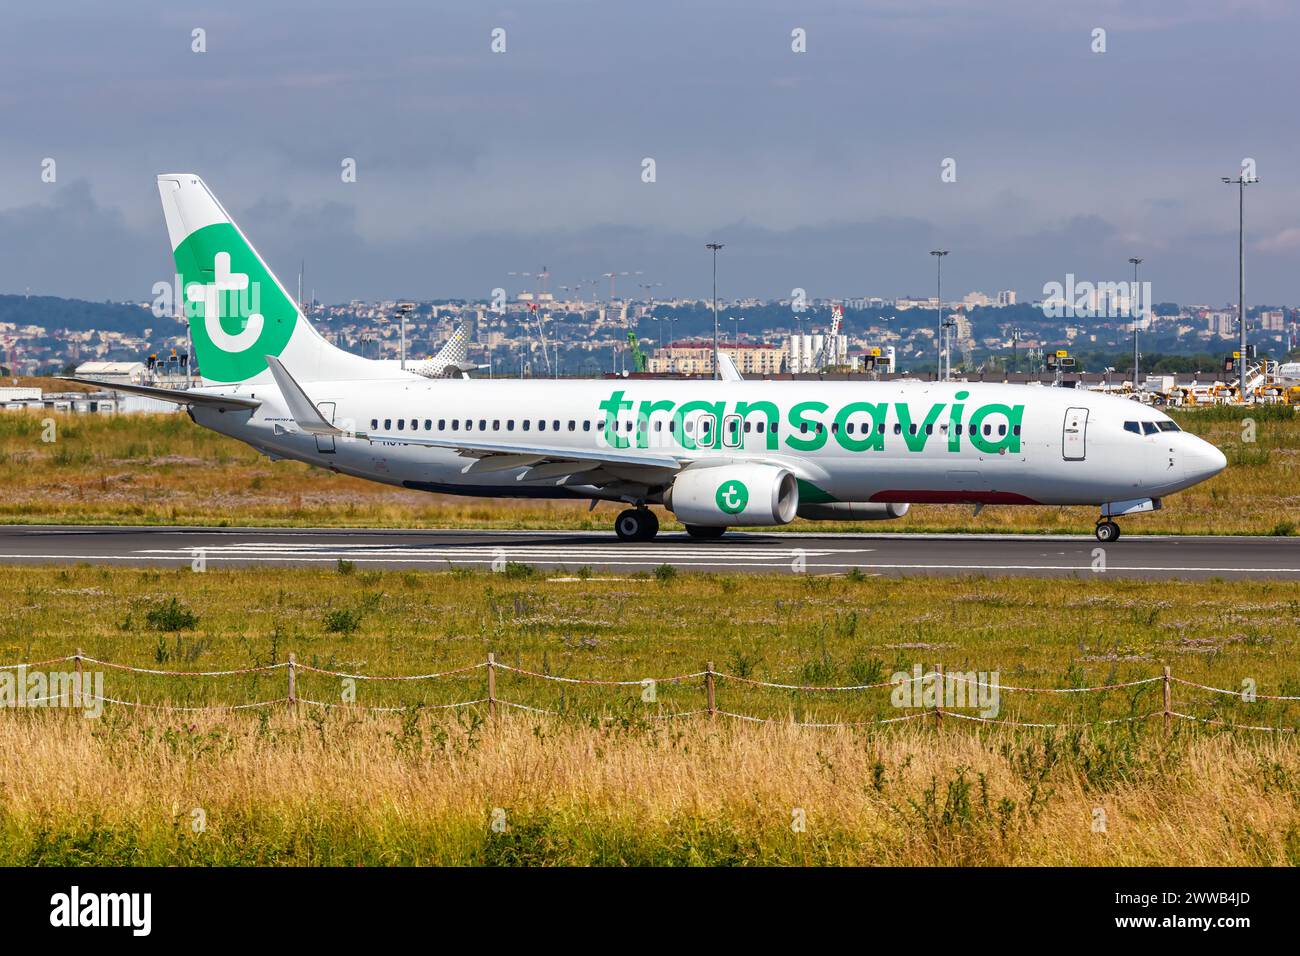 Paris, France - June 4, 2022: Transavia Boeing 737-800 airplane at Paris Orly Airport (ORY) in France. Stock Photo